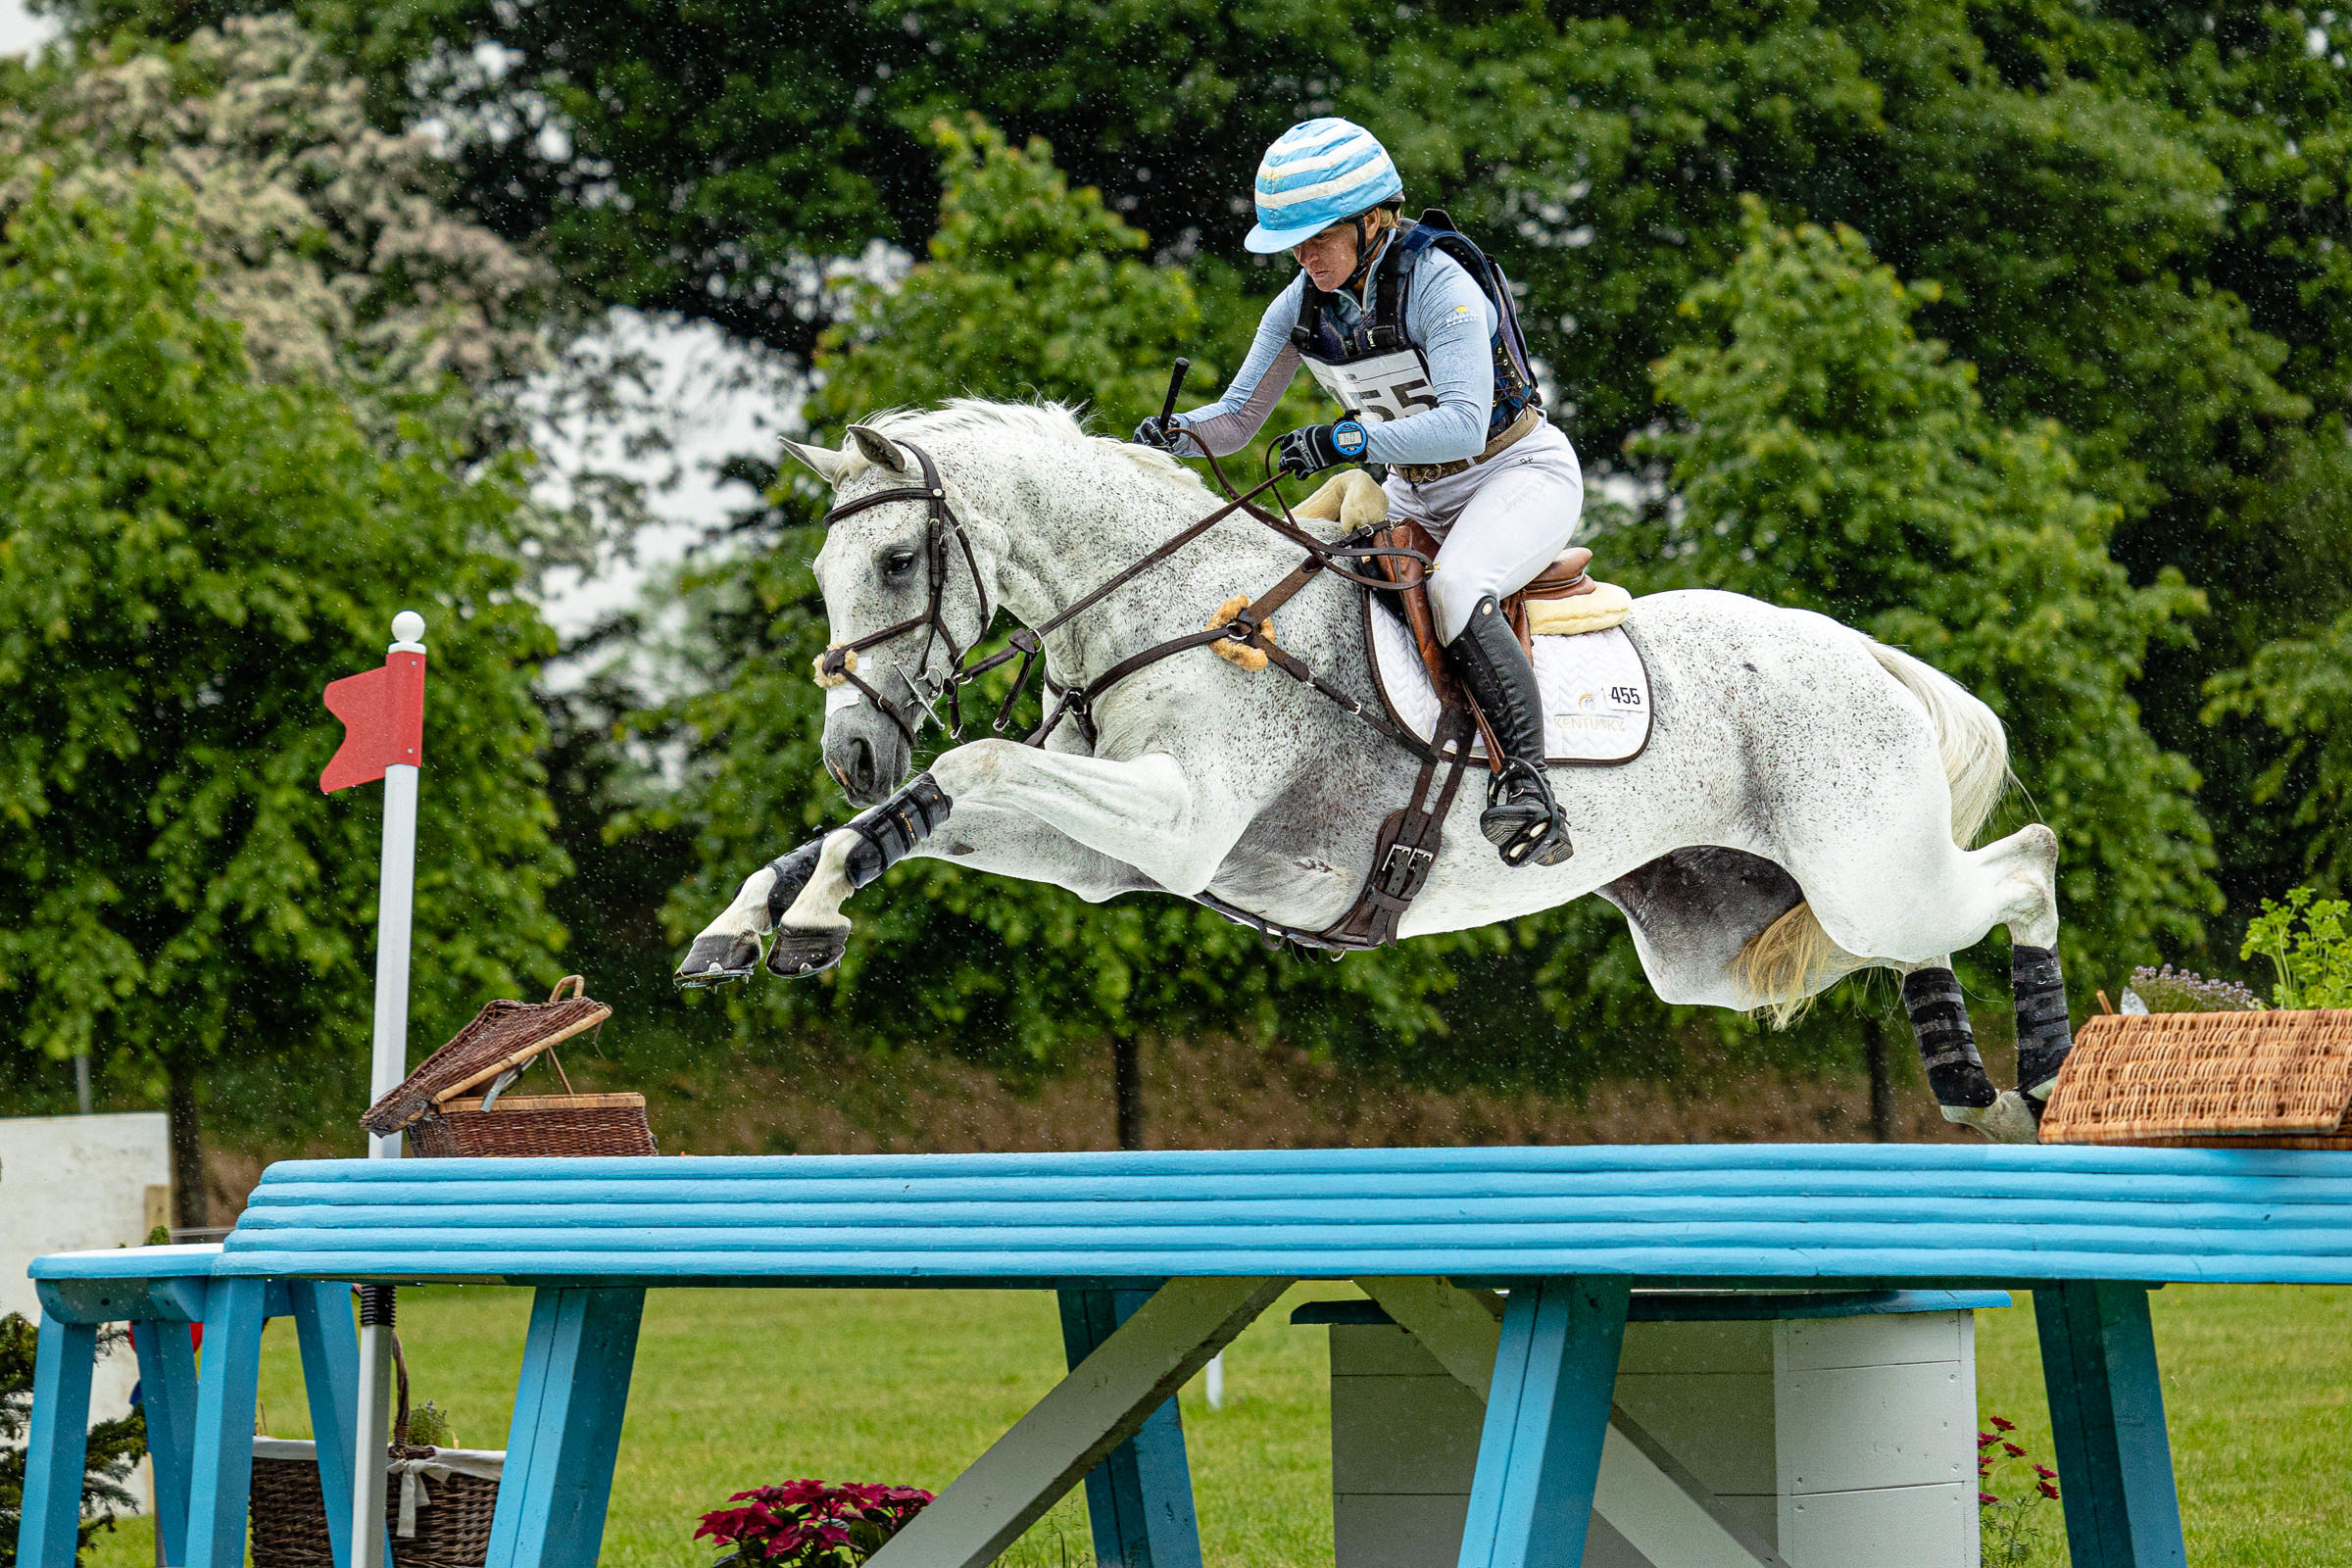 Event photography imge of an event rider jumping a cross country jump on a grey competition horse